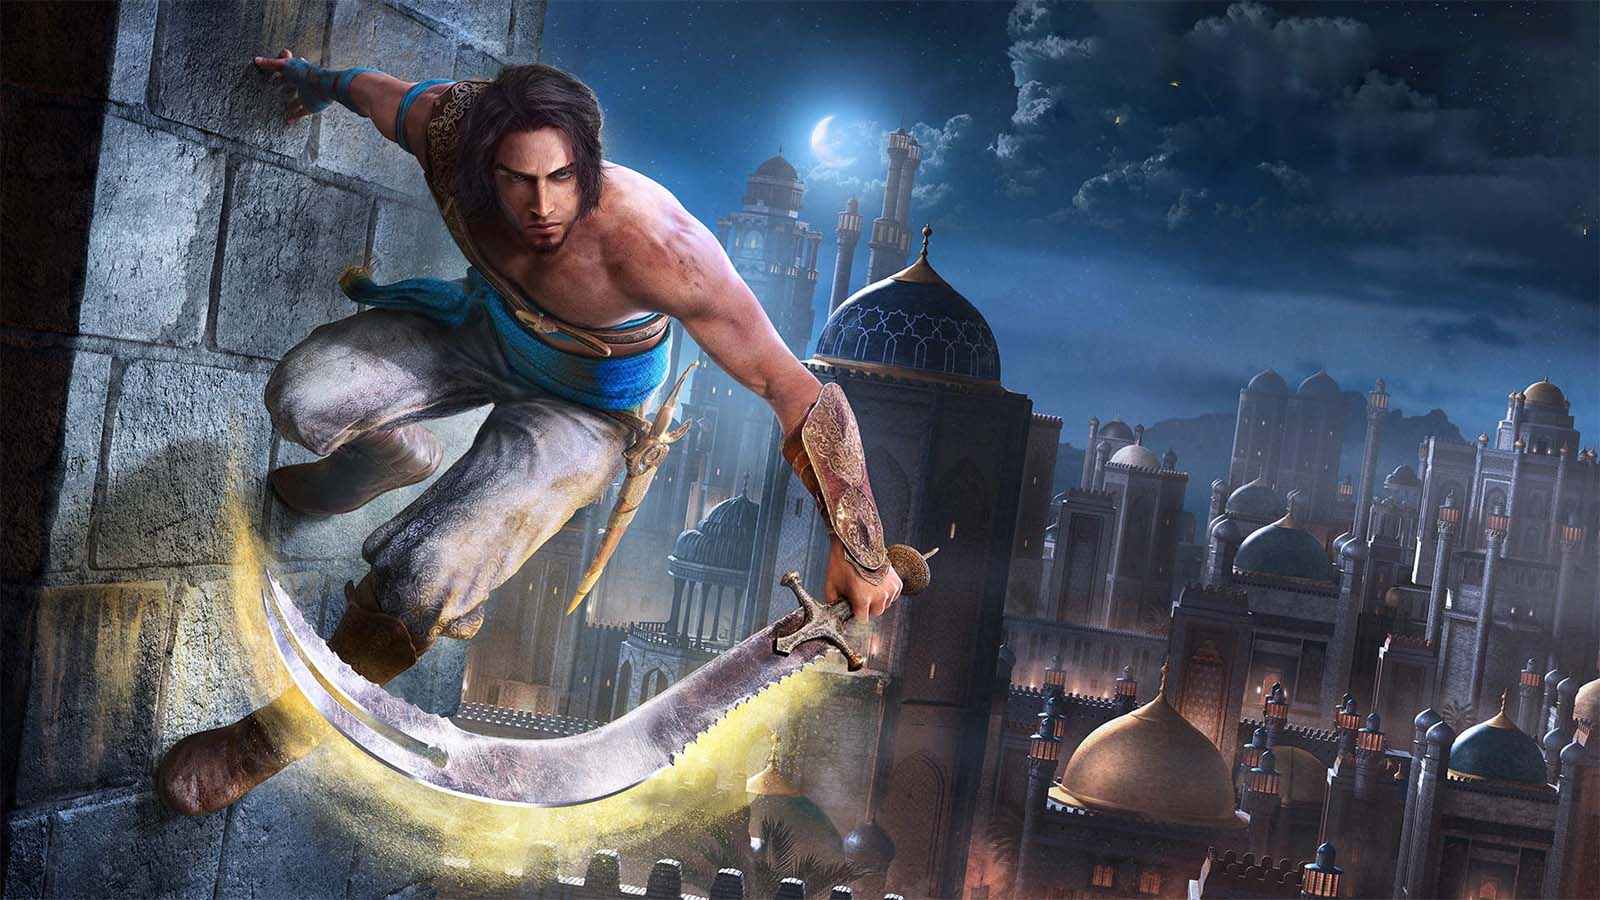 Prince of Persia The Sands of Time Remake